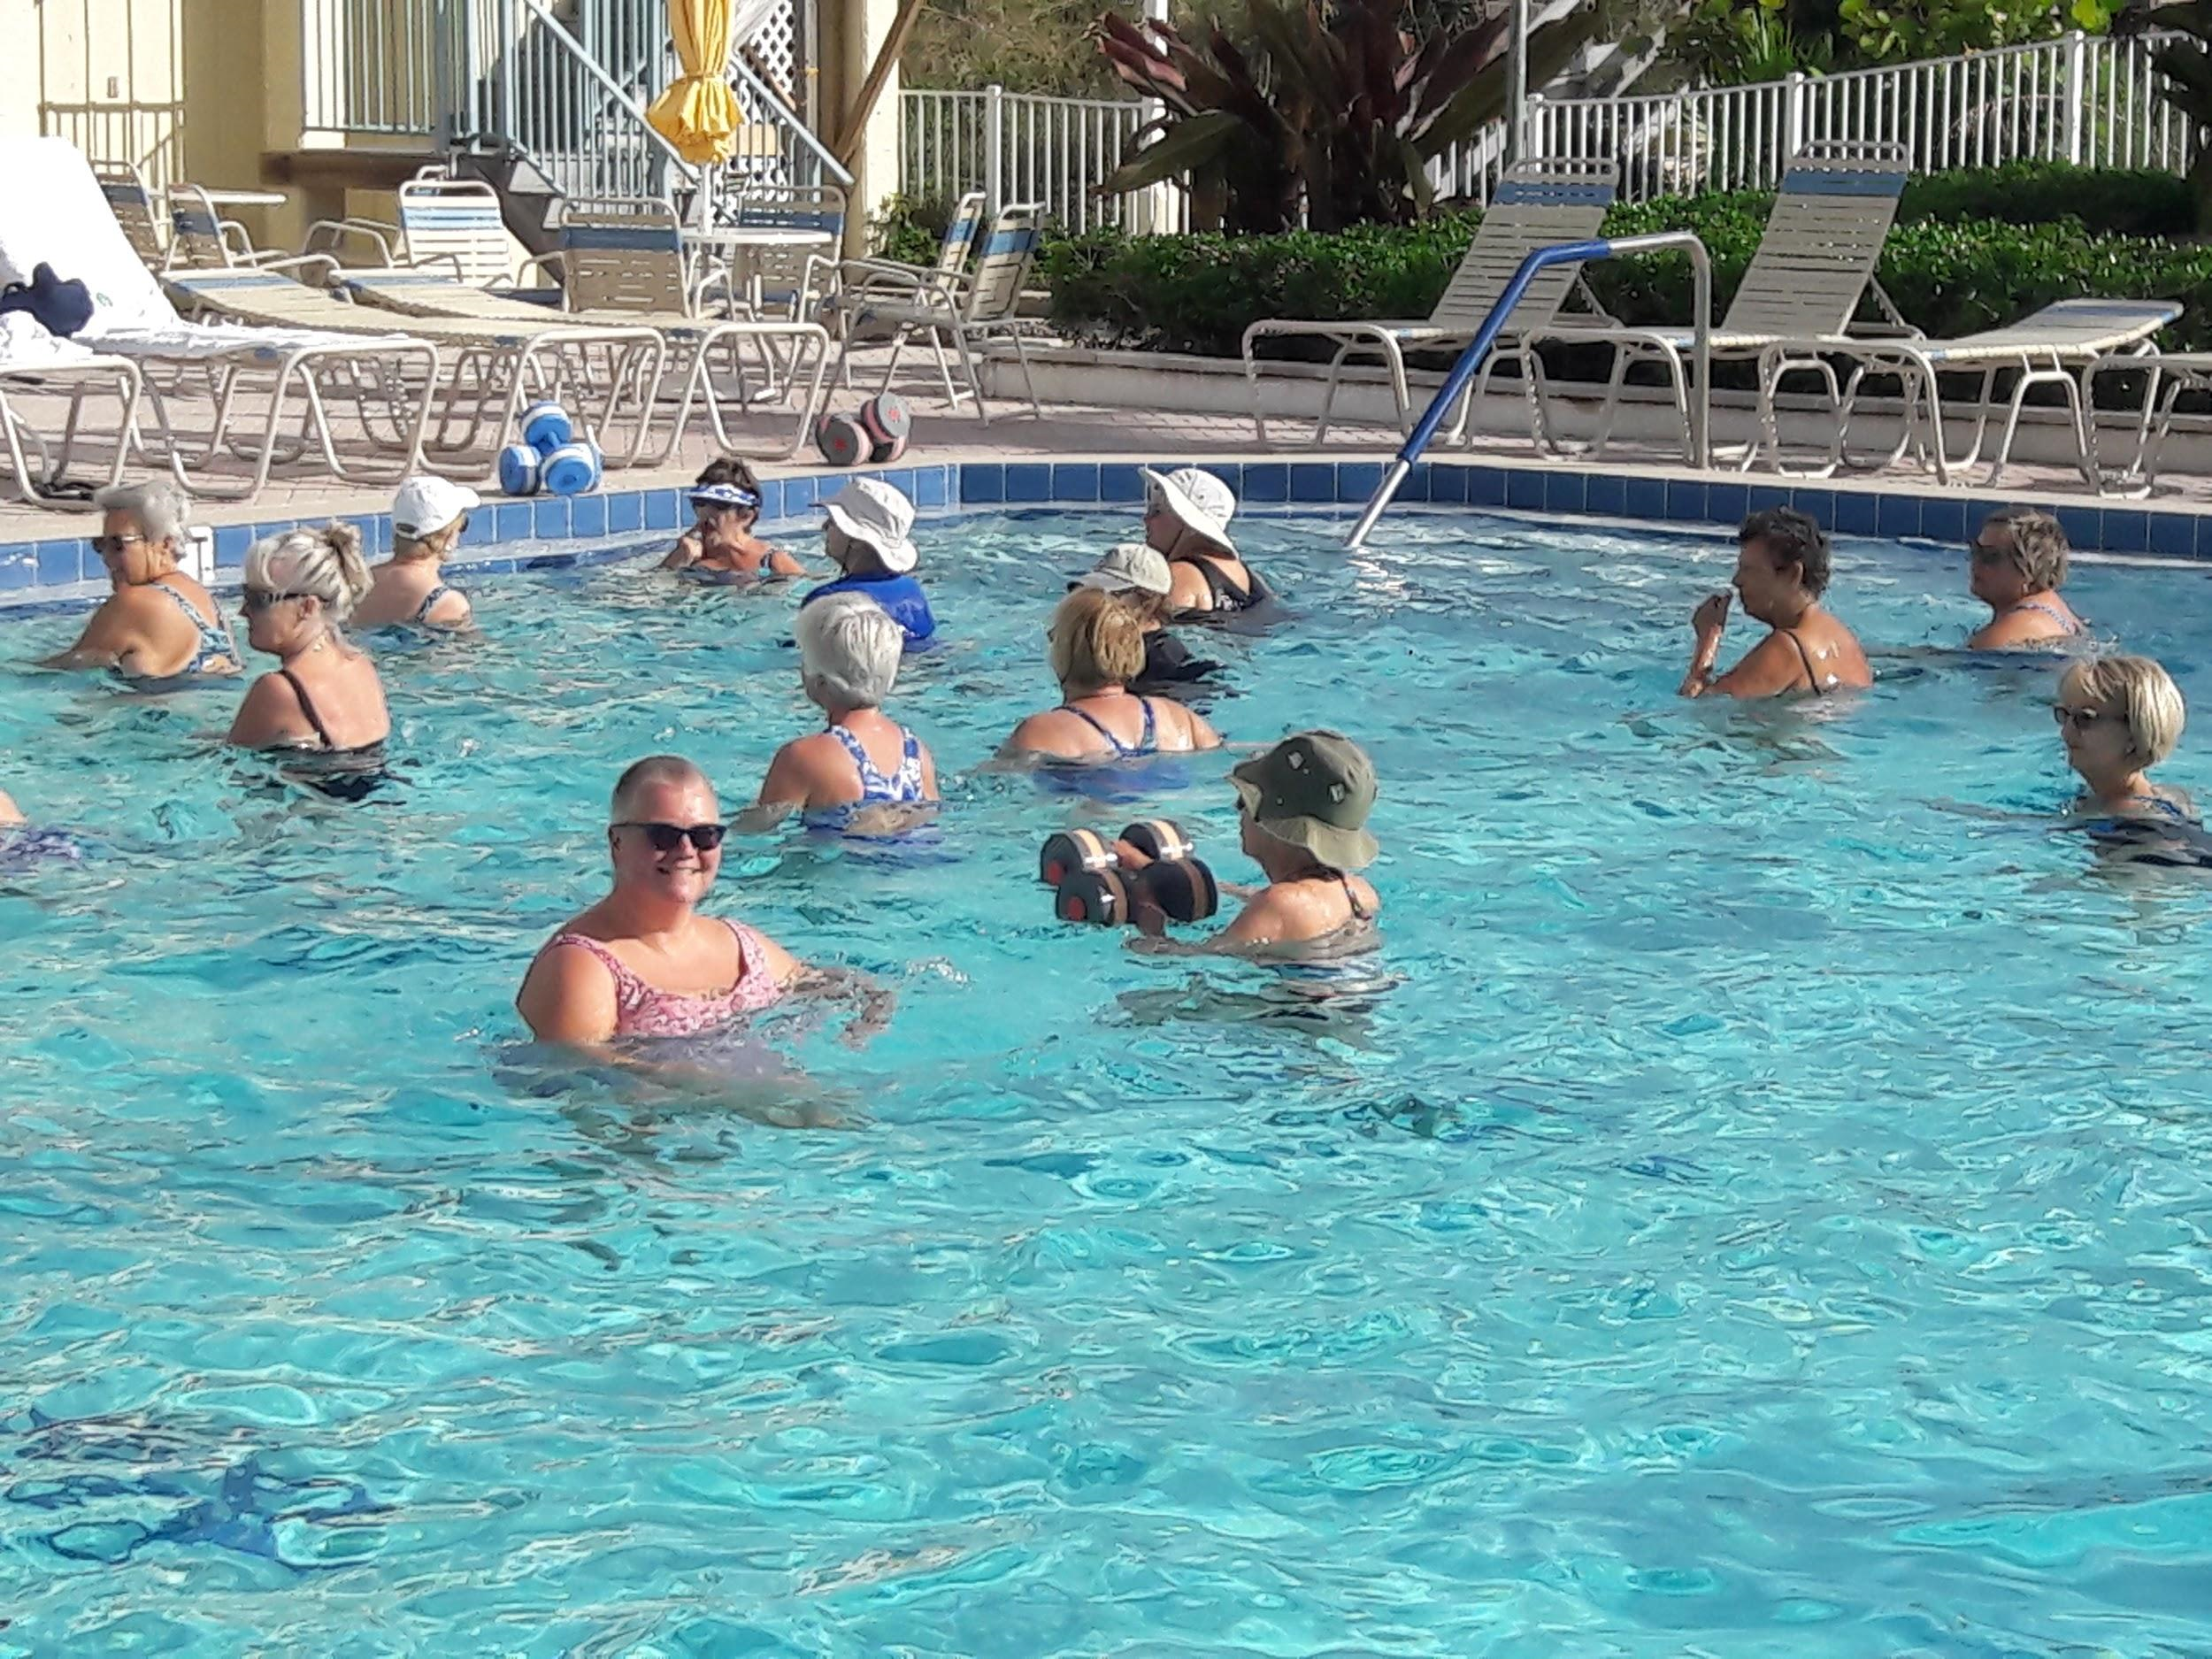 Image 2: Aquafitness in an outdoor pool in Florida. Photograph: Stephanie
                Heit